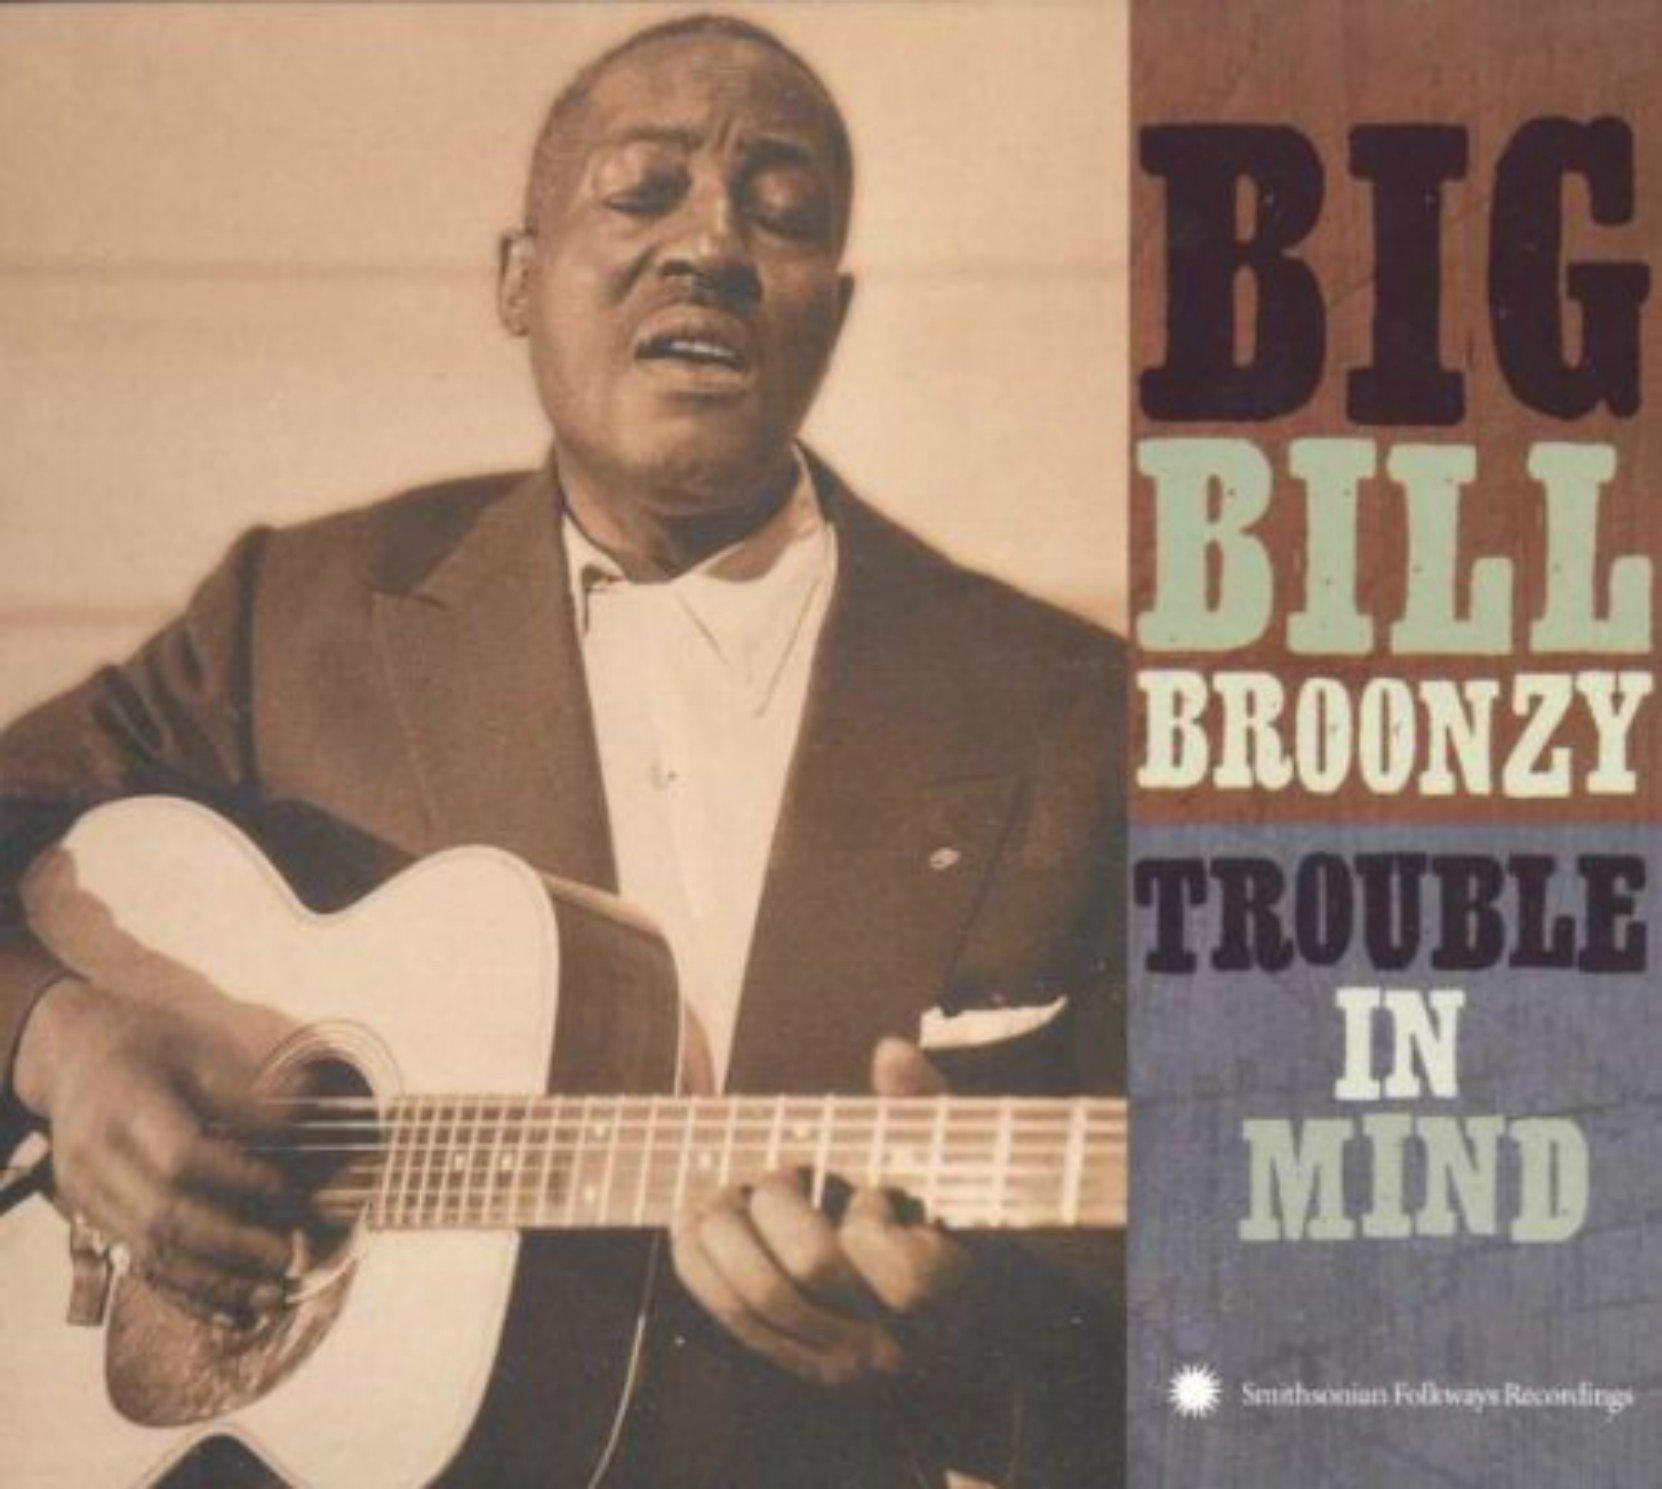 CD cover, Trouble In Mind by Big Bill Broonzy, on Smithsonian Folkways Recordings.